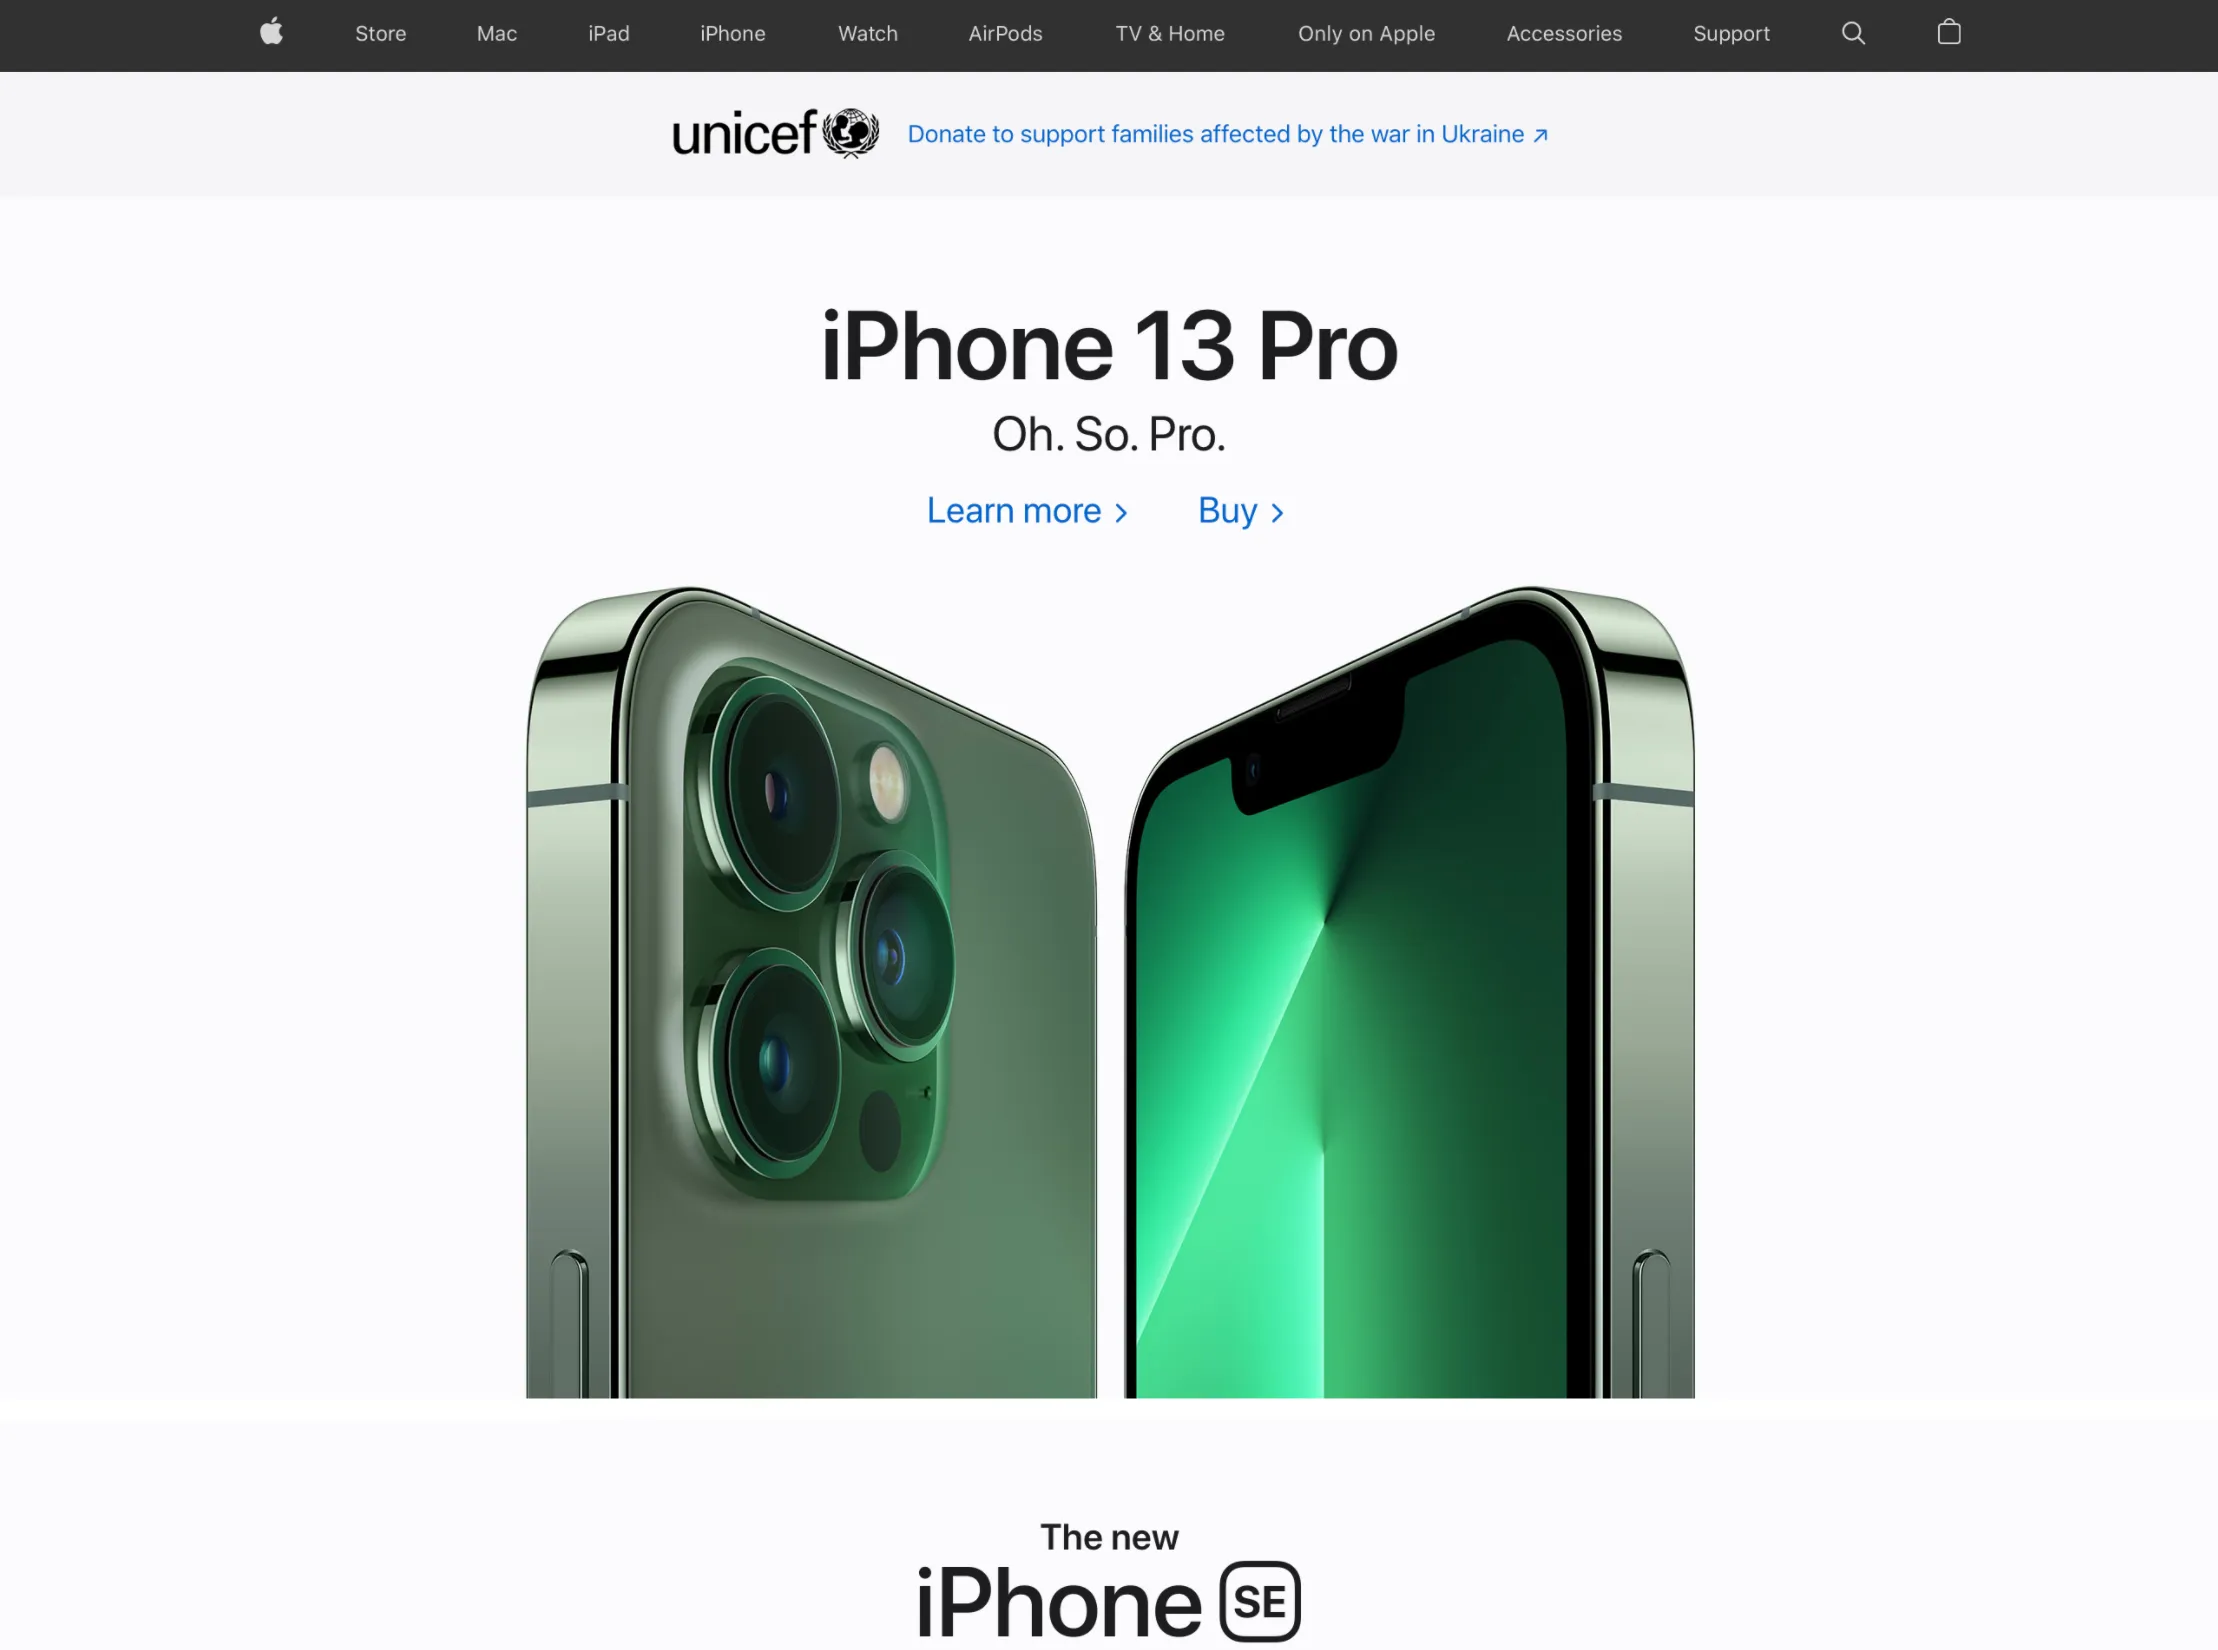 A screenshot of the Apple site